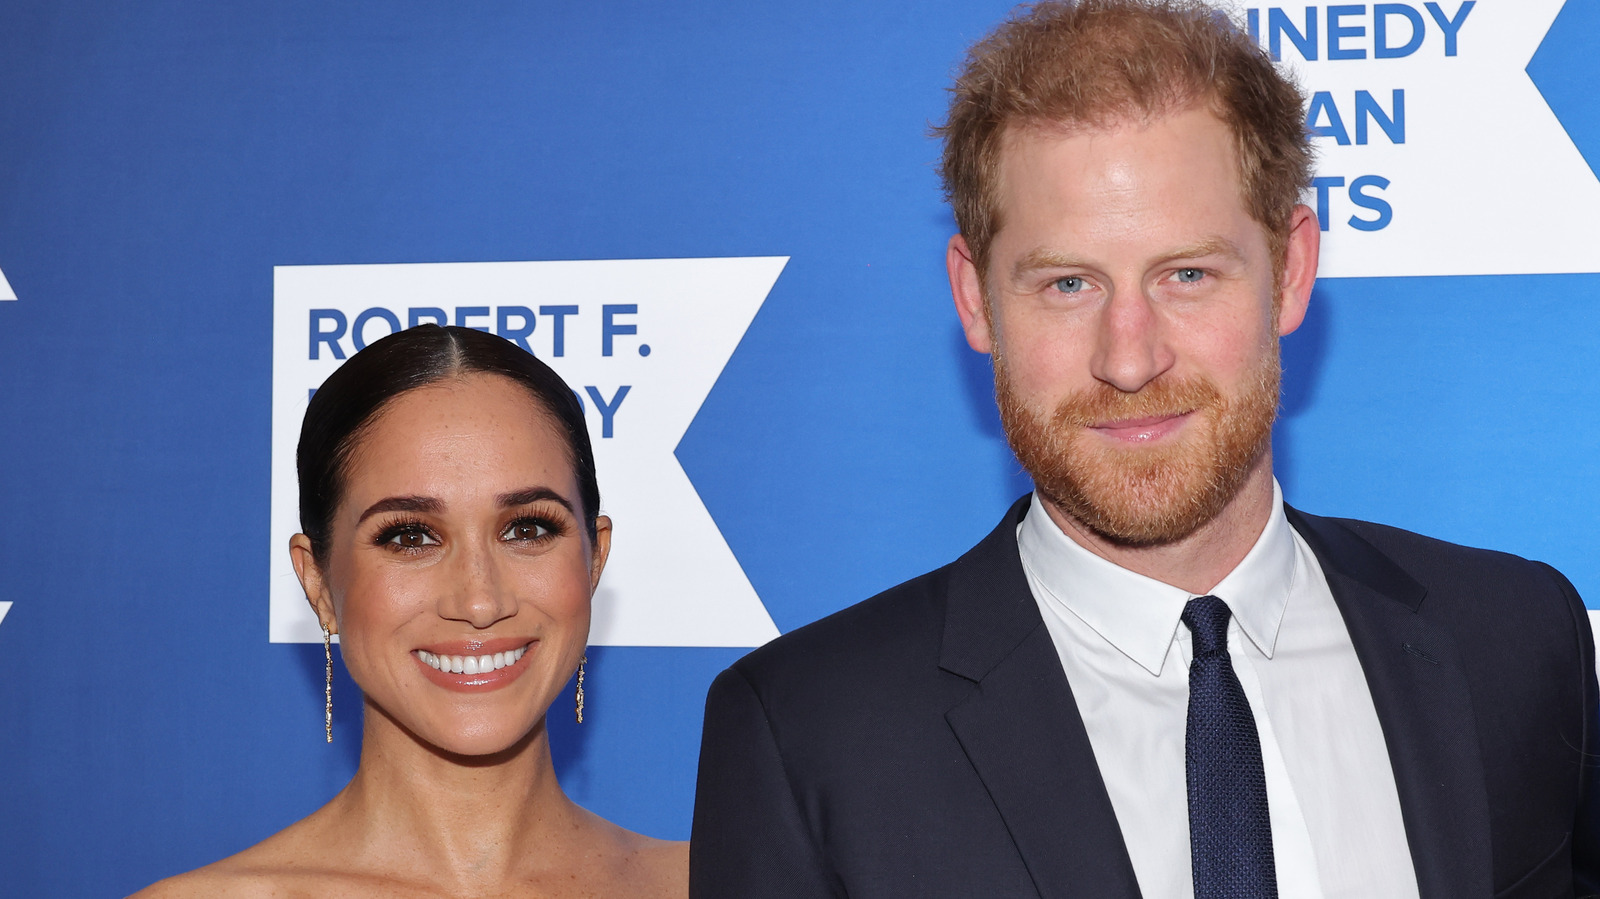 Harry & Meghan's Icy Response To Kate's Diagnosis Confirms What We Suspected